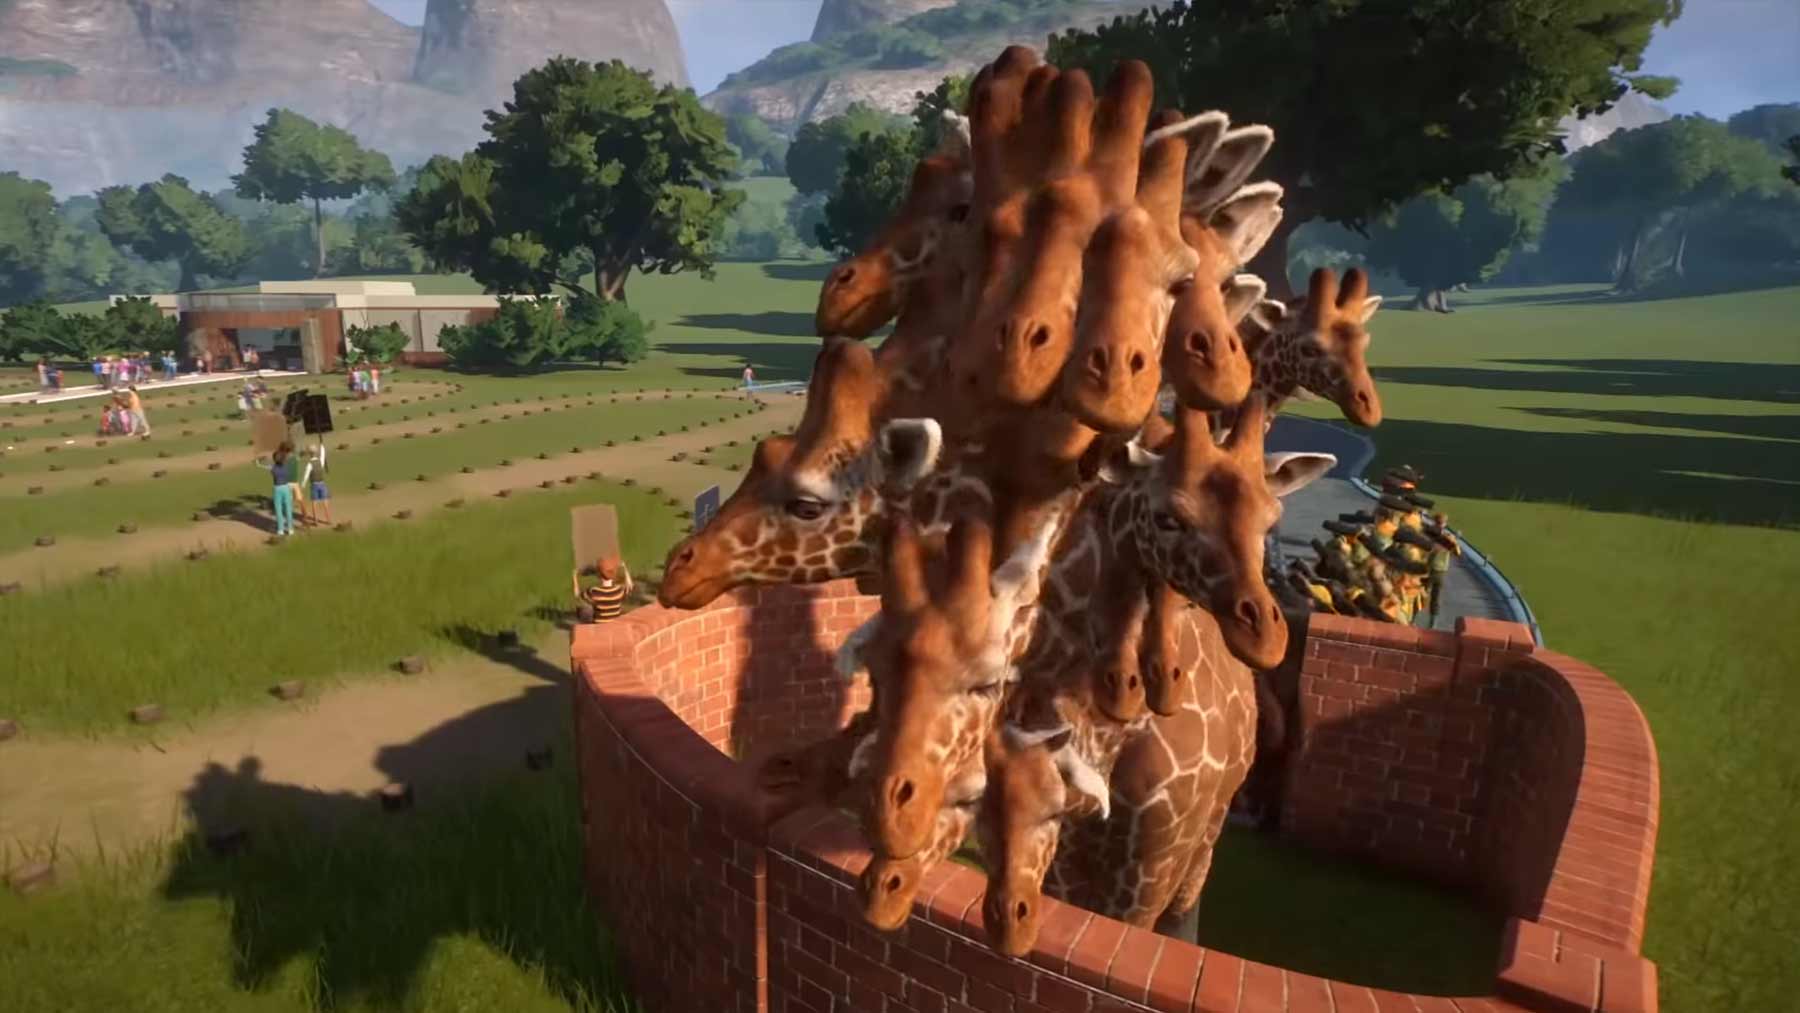 Saulustiges Let's Play-Video zu den Bugs und Irrsinnigkeiten in "Planet Zoo" I-Built-an-Unethical-Zoo-Where-Nobody-Is-Safe-Planet-Zoo 